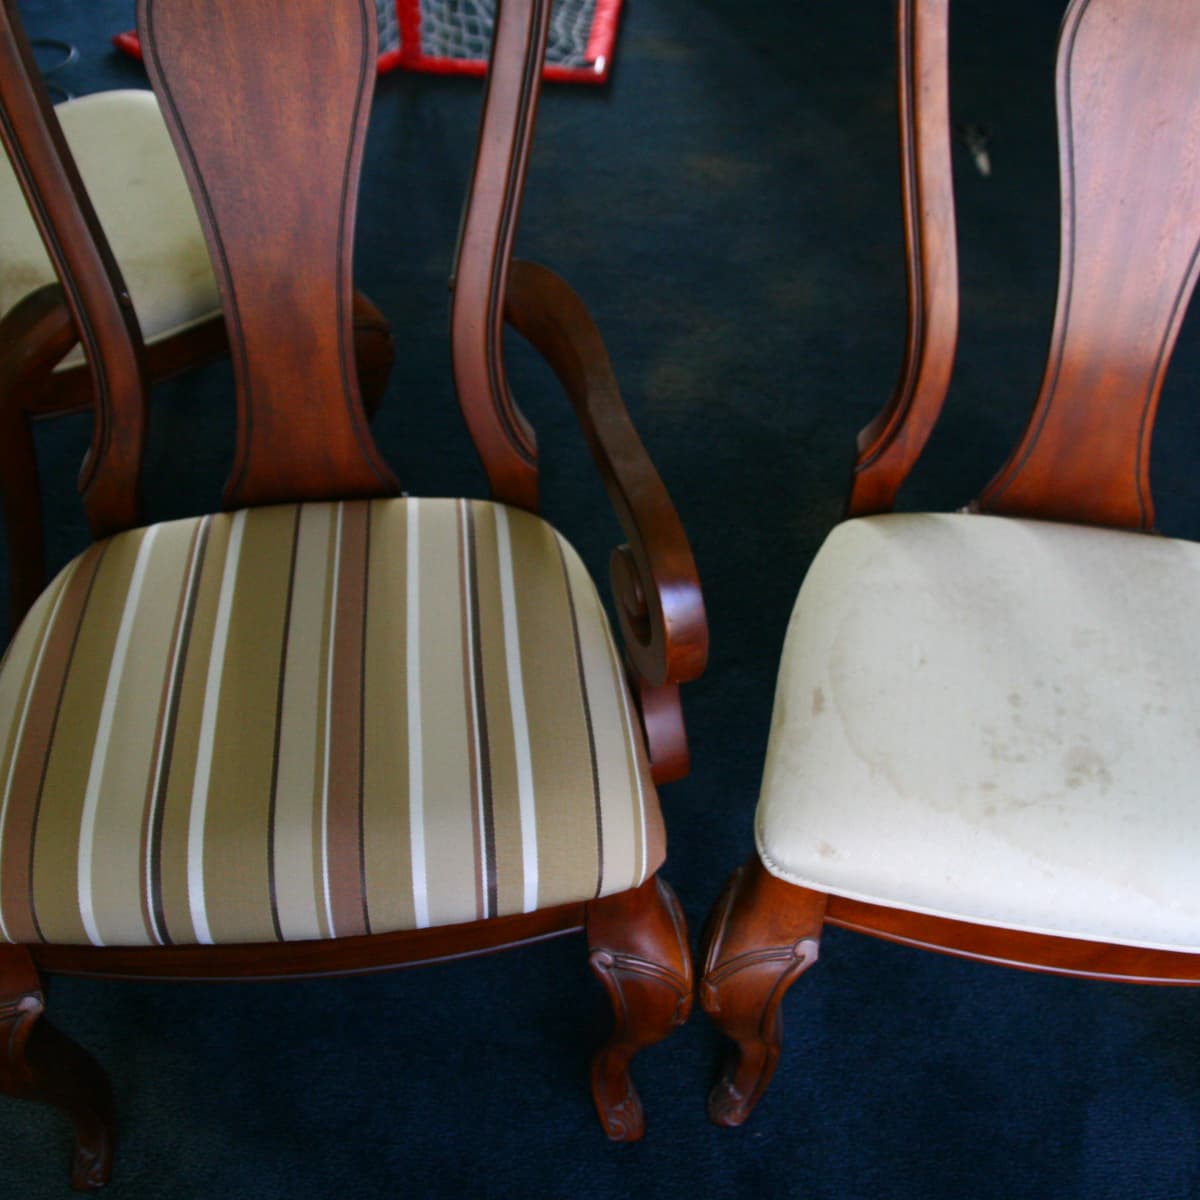 How To Reupholster A Dining Room Chair, Leather Upholstery Fabric For Dining Chairs